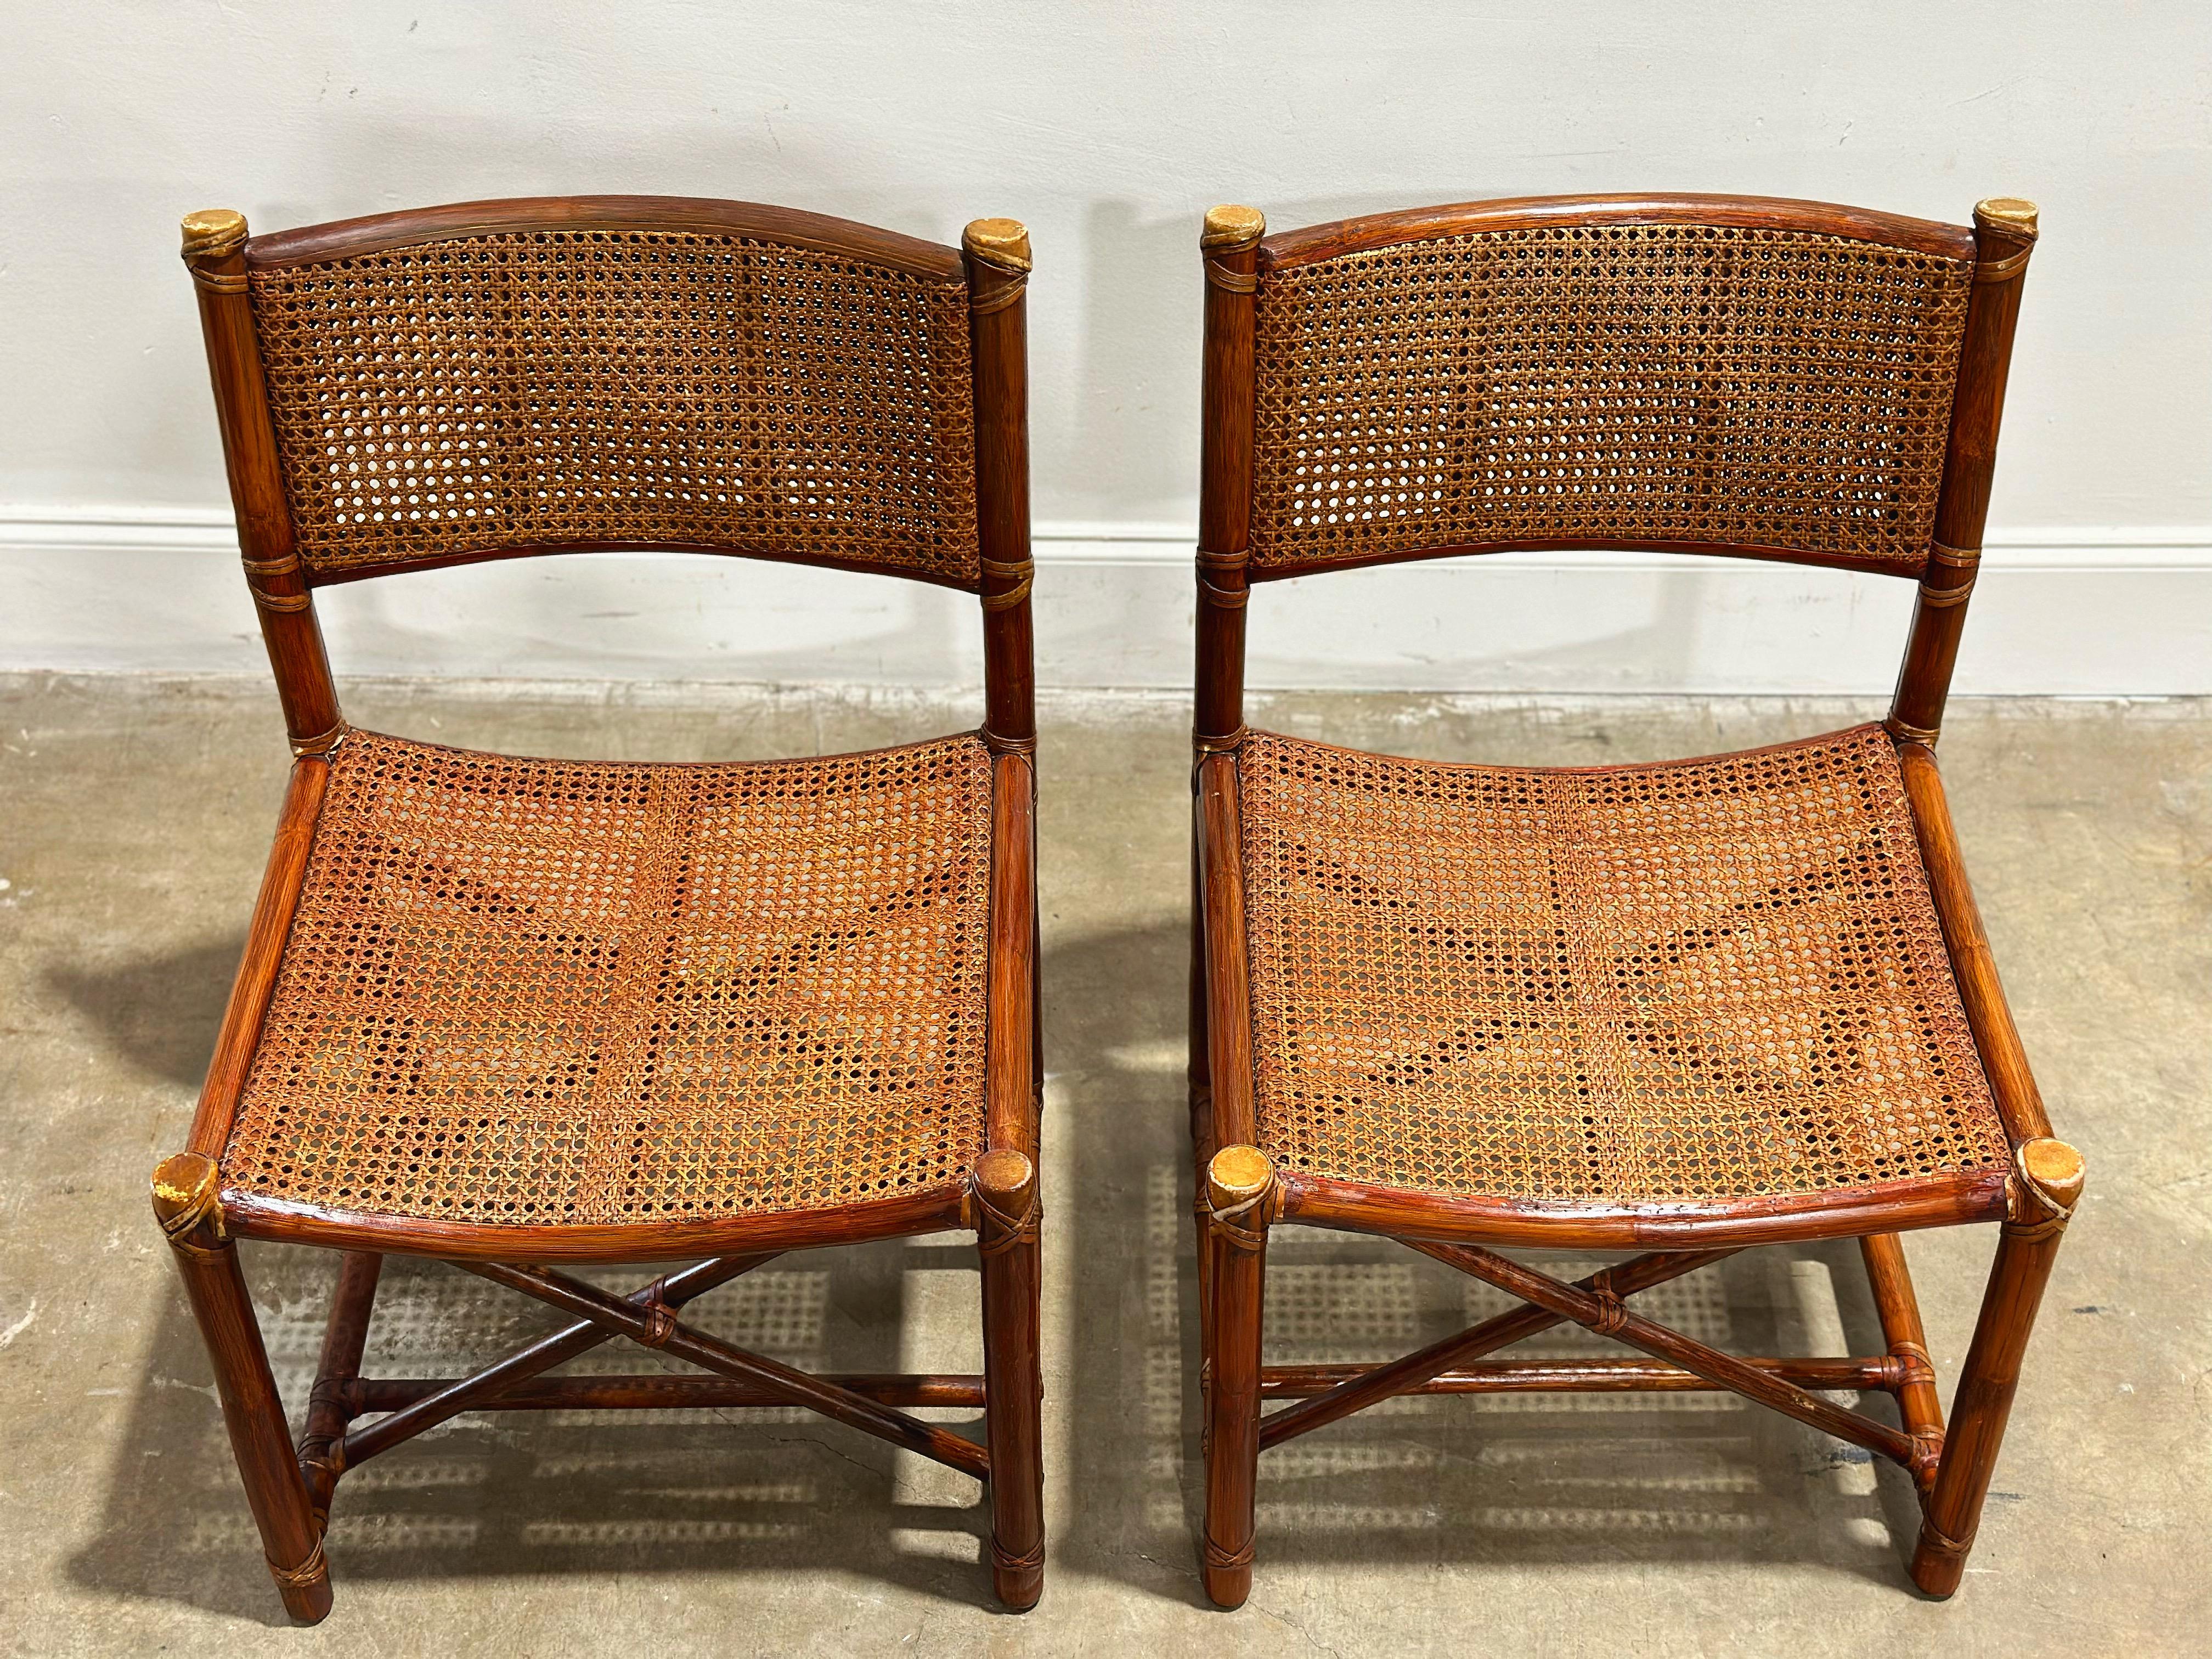 Paar Vintage McGuire Director Style Organic Modern Caned Rattan Dining Chairs (Leder) im Angebot